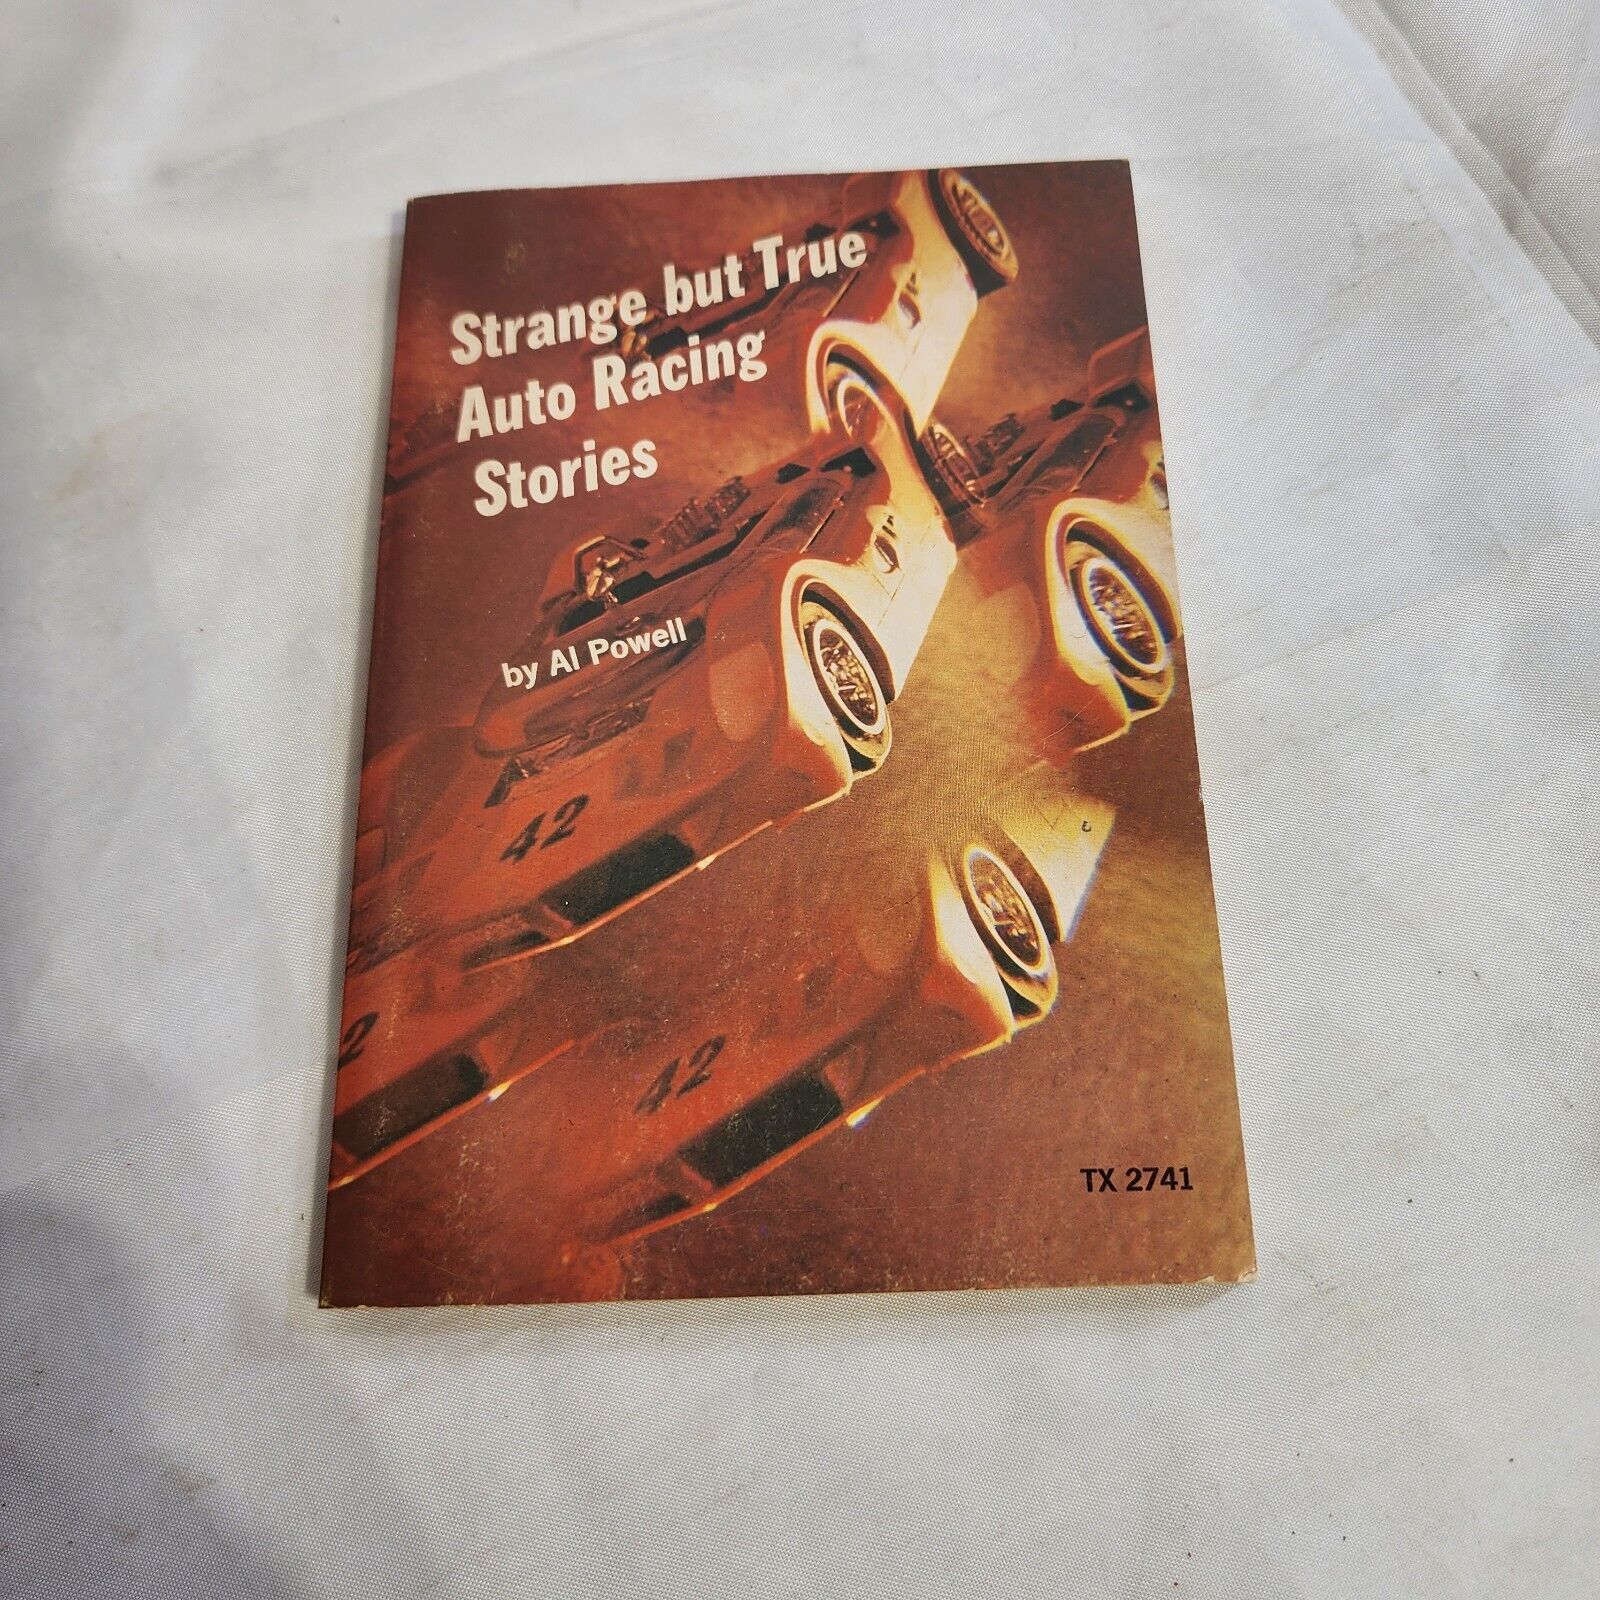 Primary image for Strange but True Auto Racing Stories paperback by Al Powell 1974